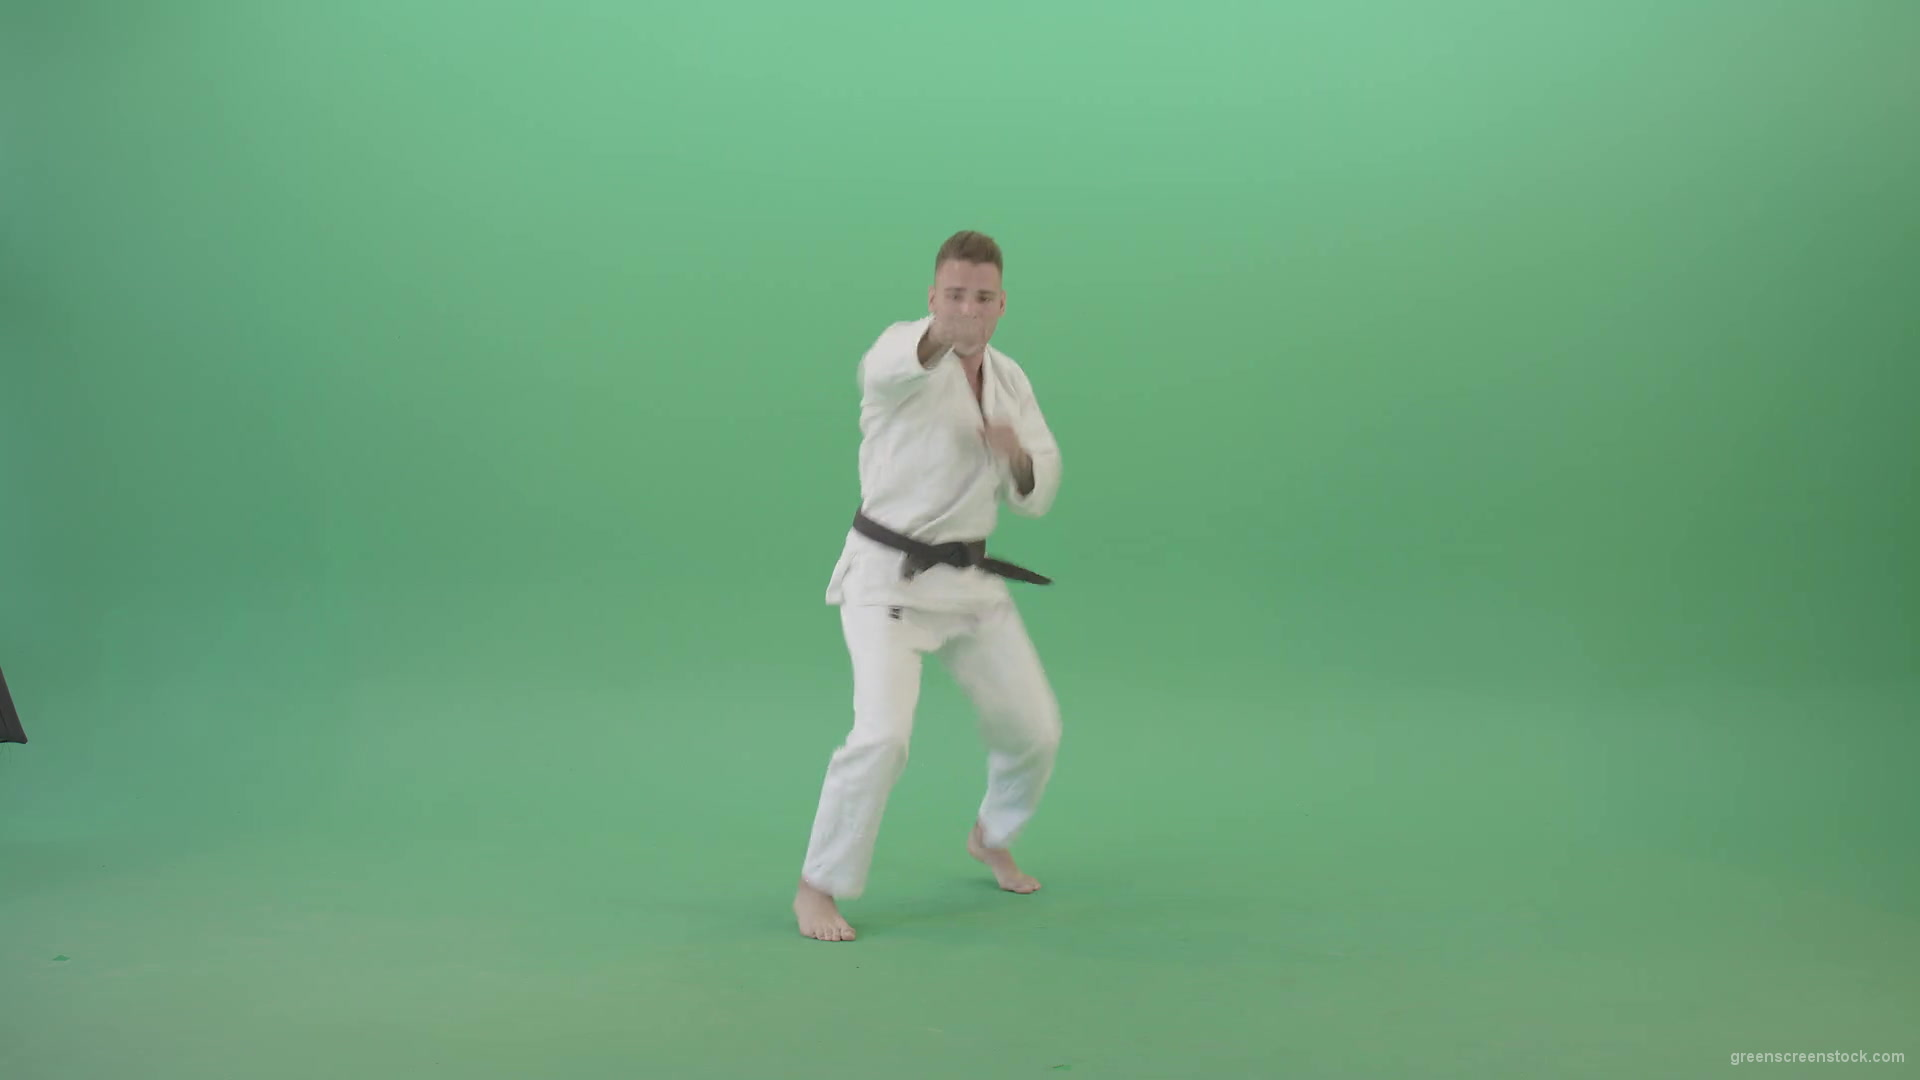 Jujutsu-Sportman-make-front-kick-and-punch-isolated-on-green-screen-4K-Video-Footage-1920_008 Green Screen Stock